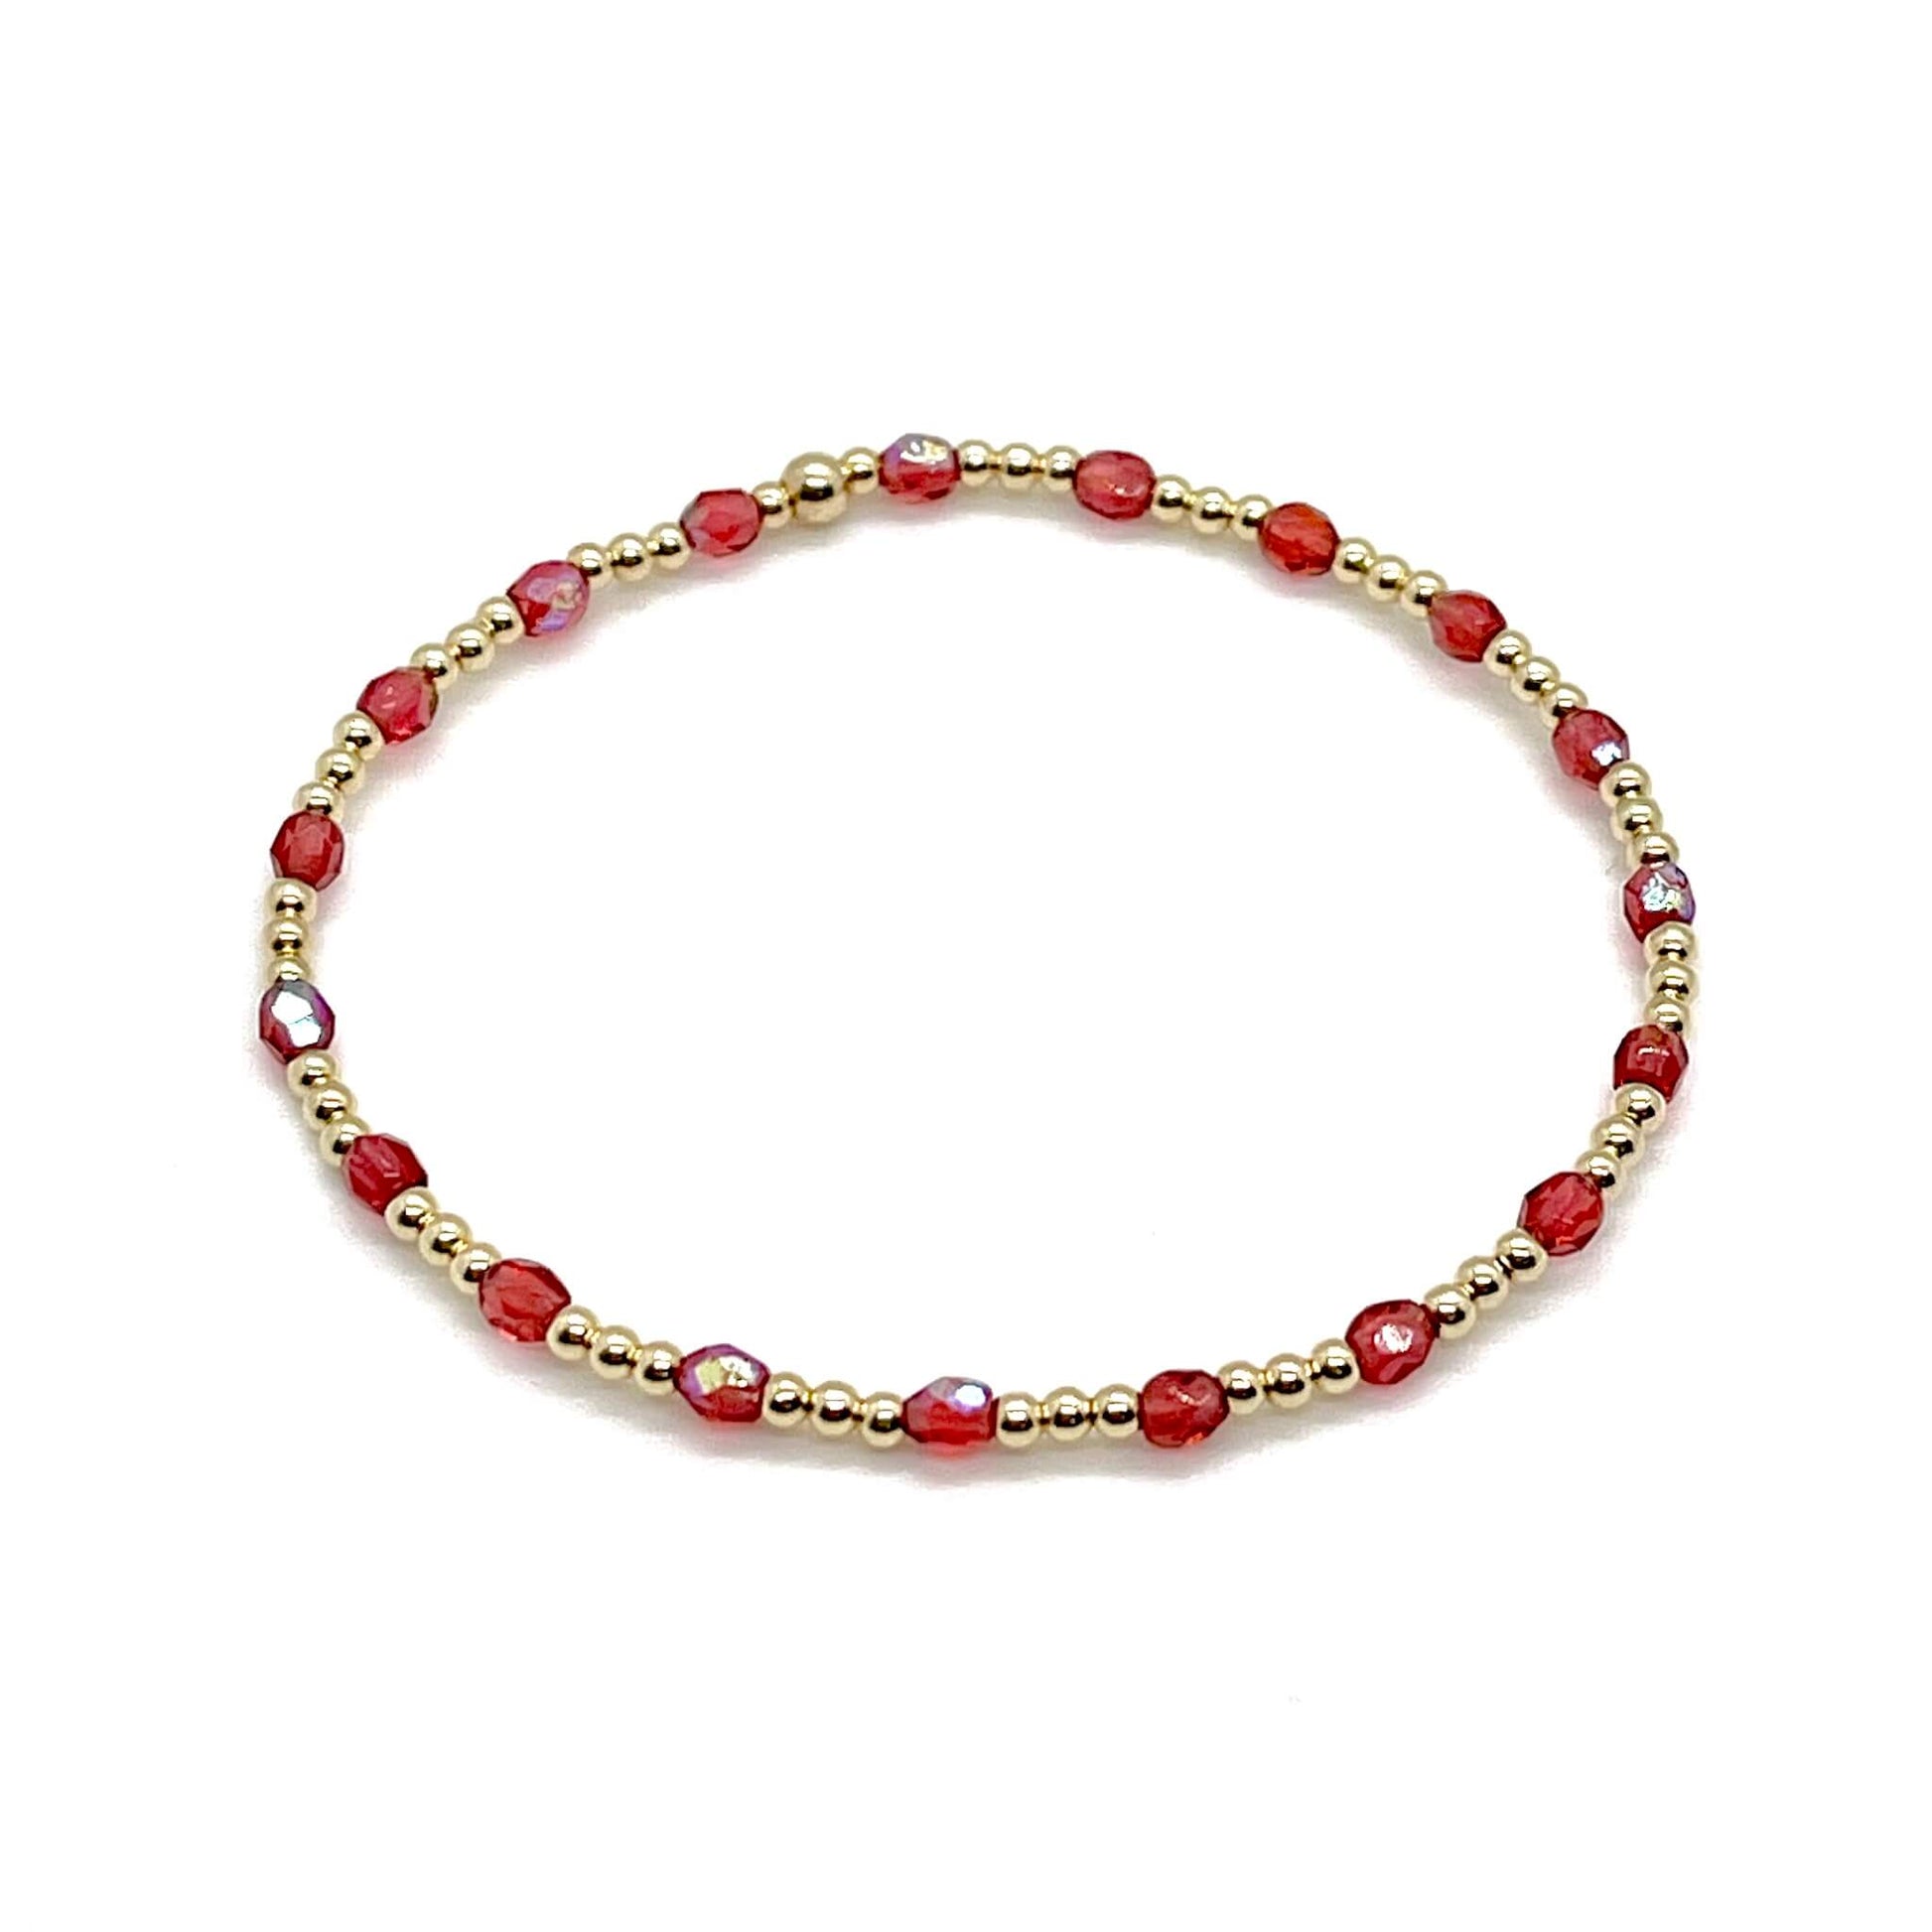 Coral-red crystal bracelet with 14K gold filled beads. Women's beaded stretch bracelet.